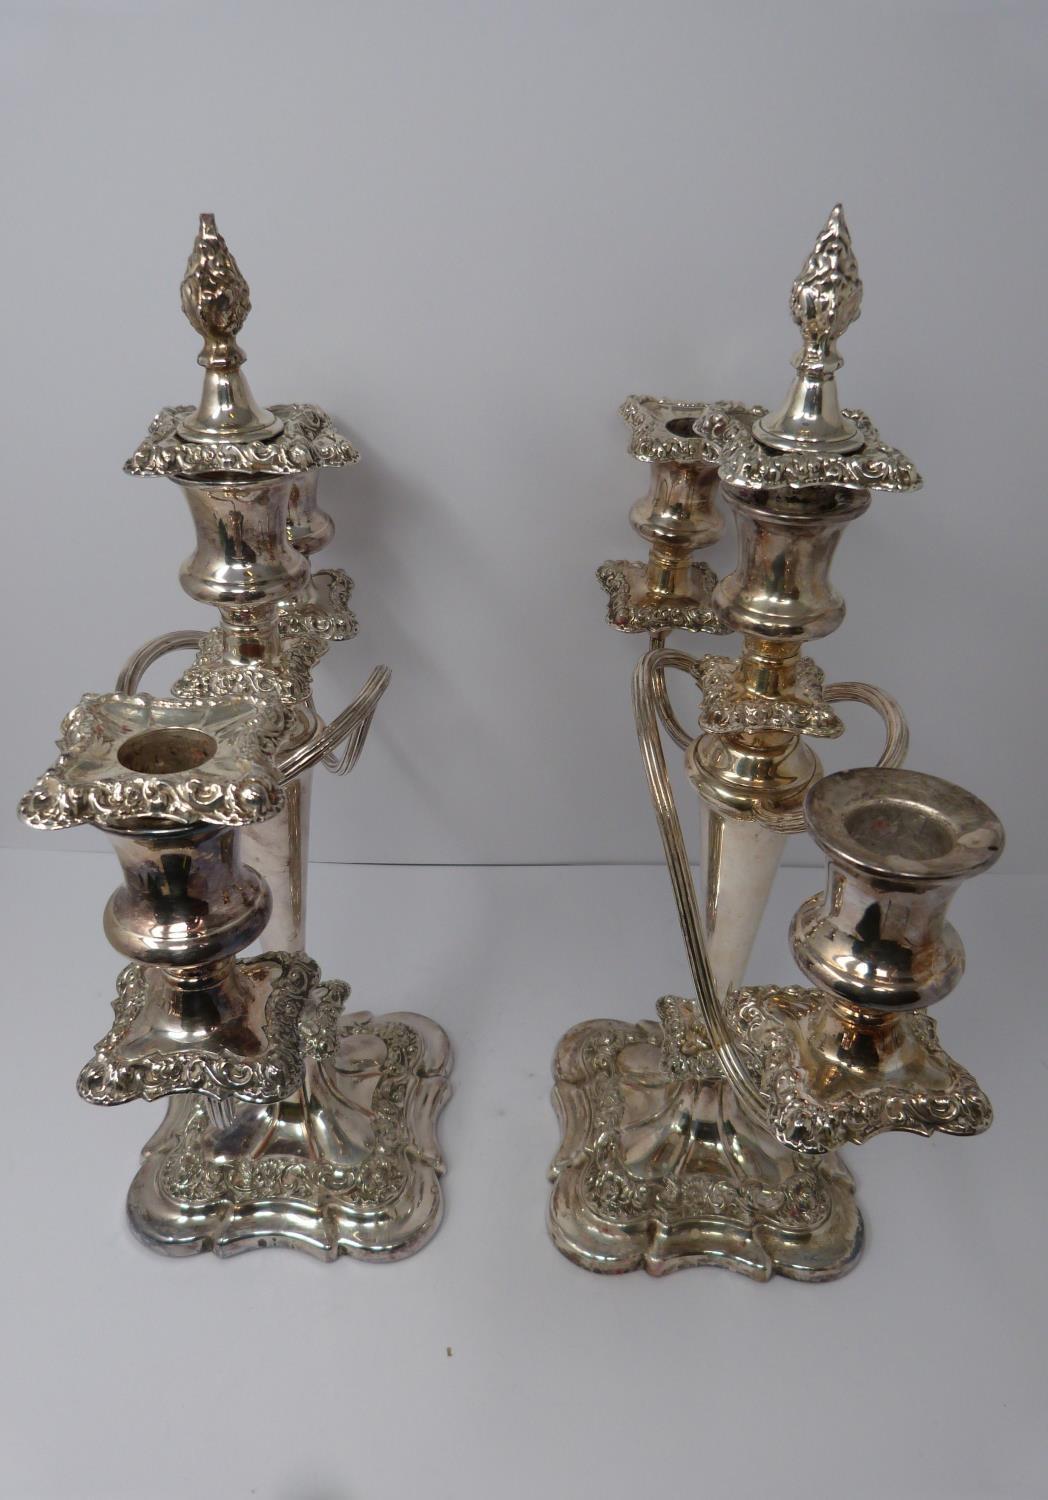 A pair of silver plated candelabra. Repoussé work, elegant swirled design, flame removable finial - Image 2 of 9